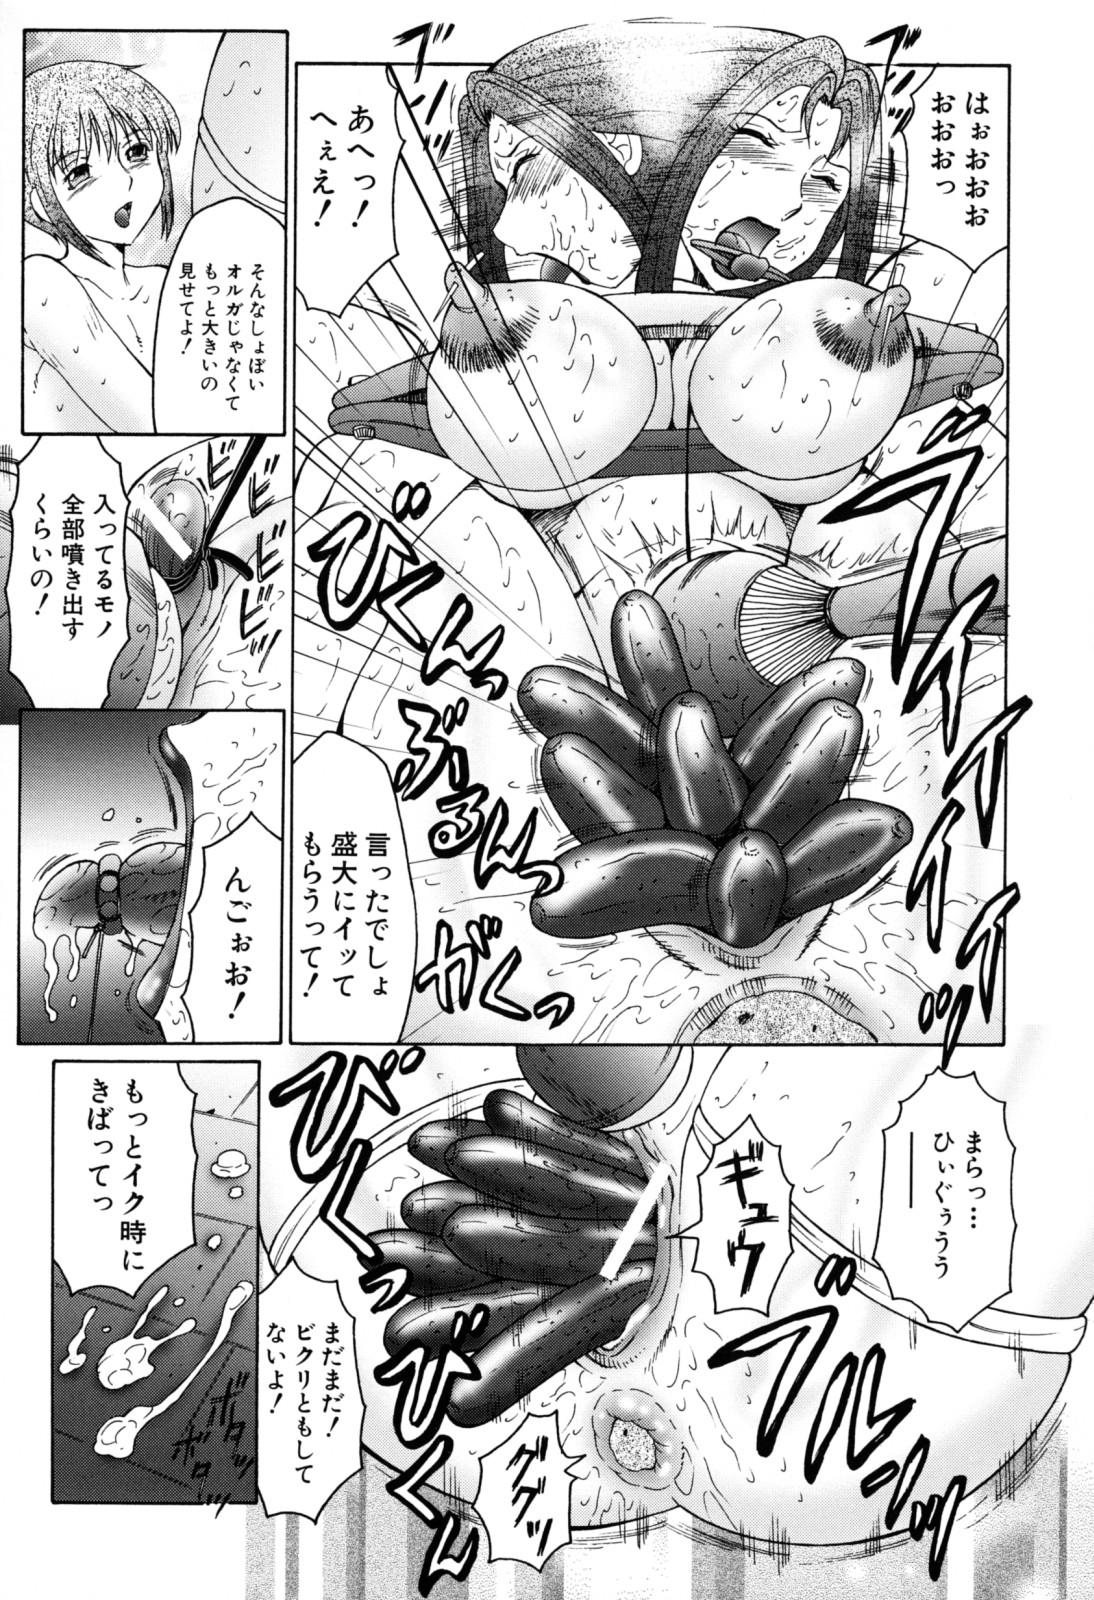 Boshino Toriko - The Captive of Mother and the Son 176